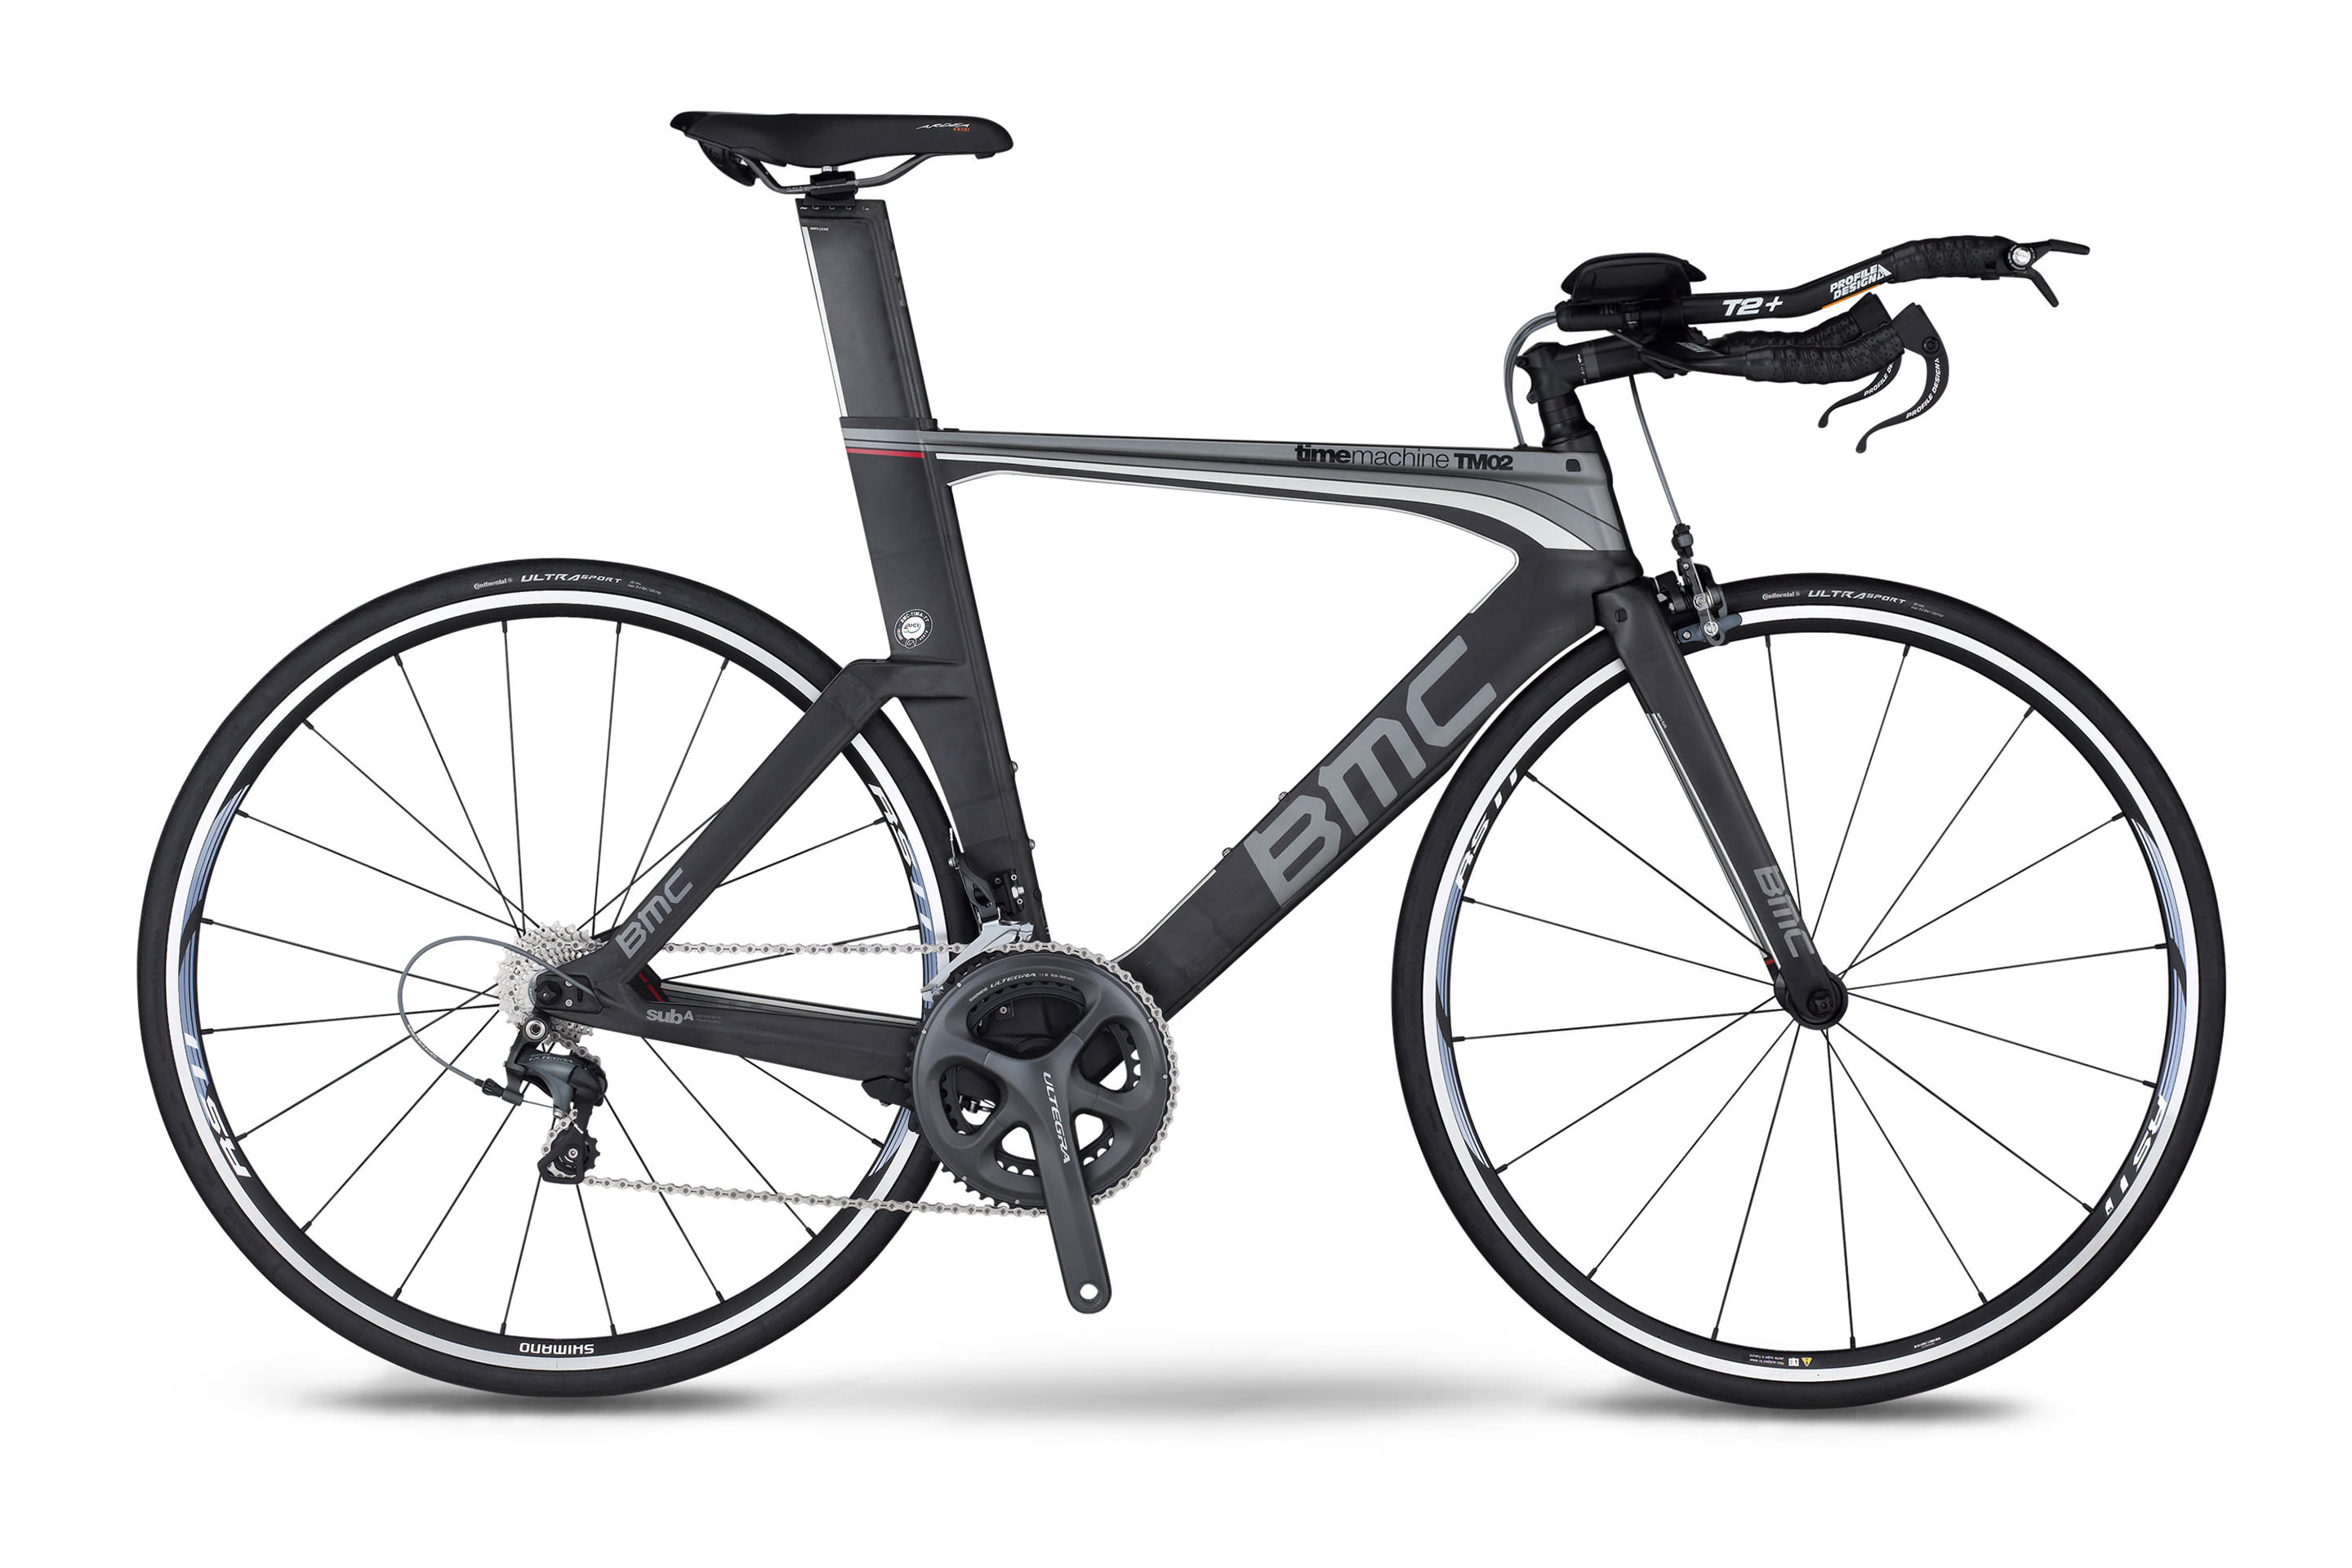 2014 TimeMachine TM02 Ultegra | Bouticycle